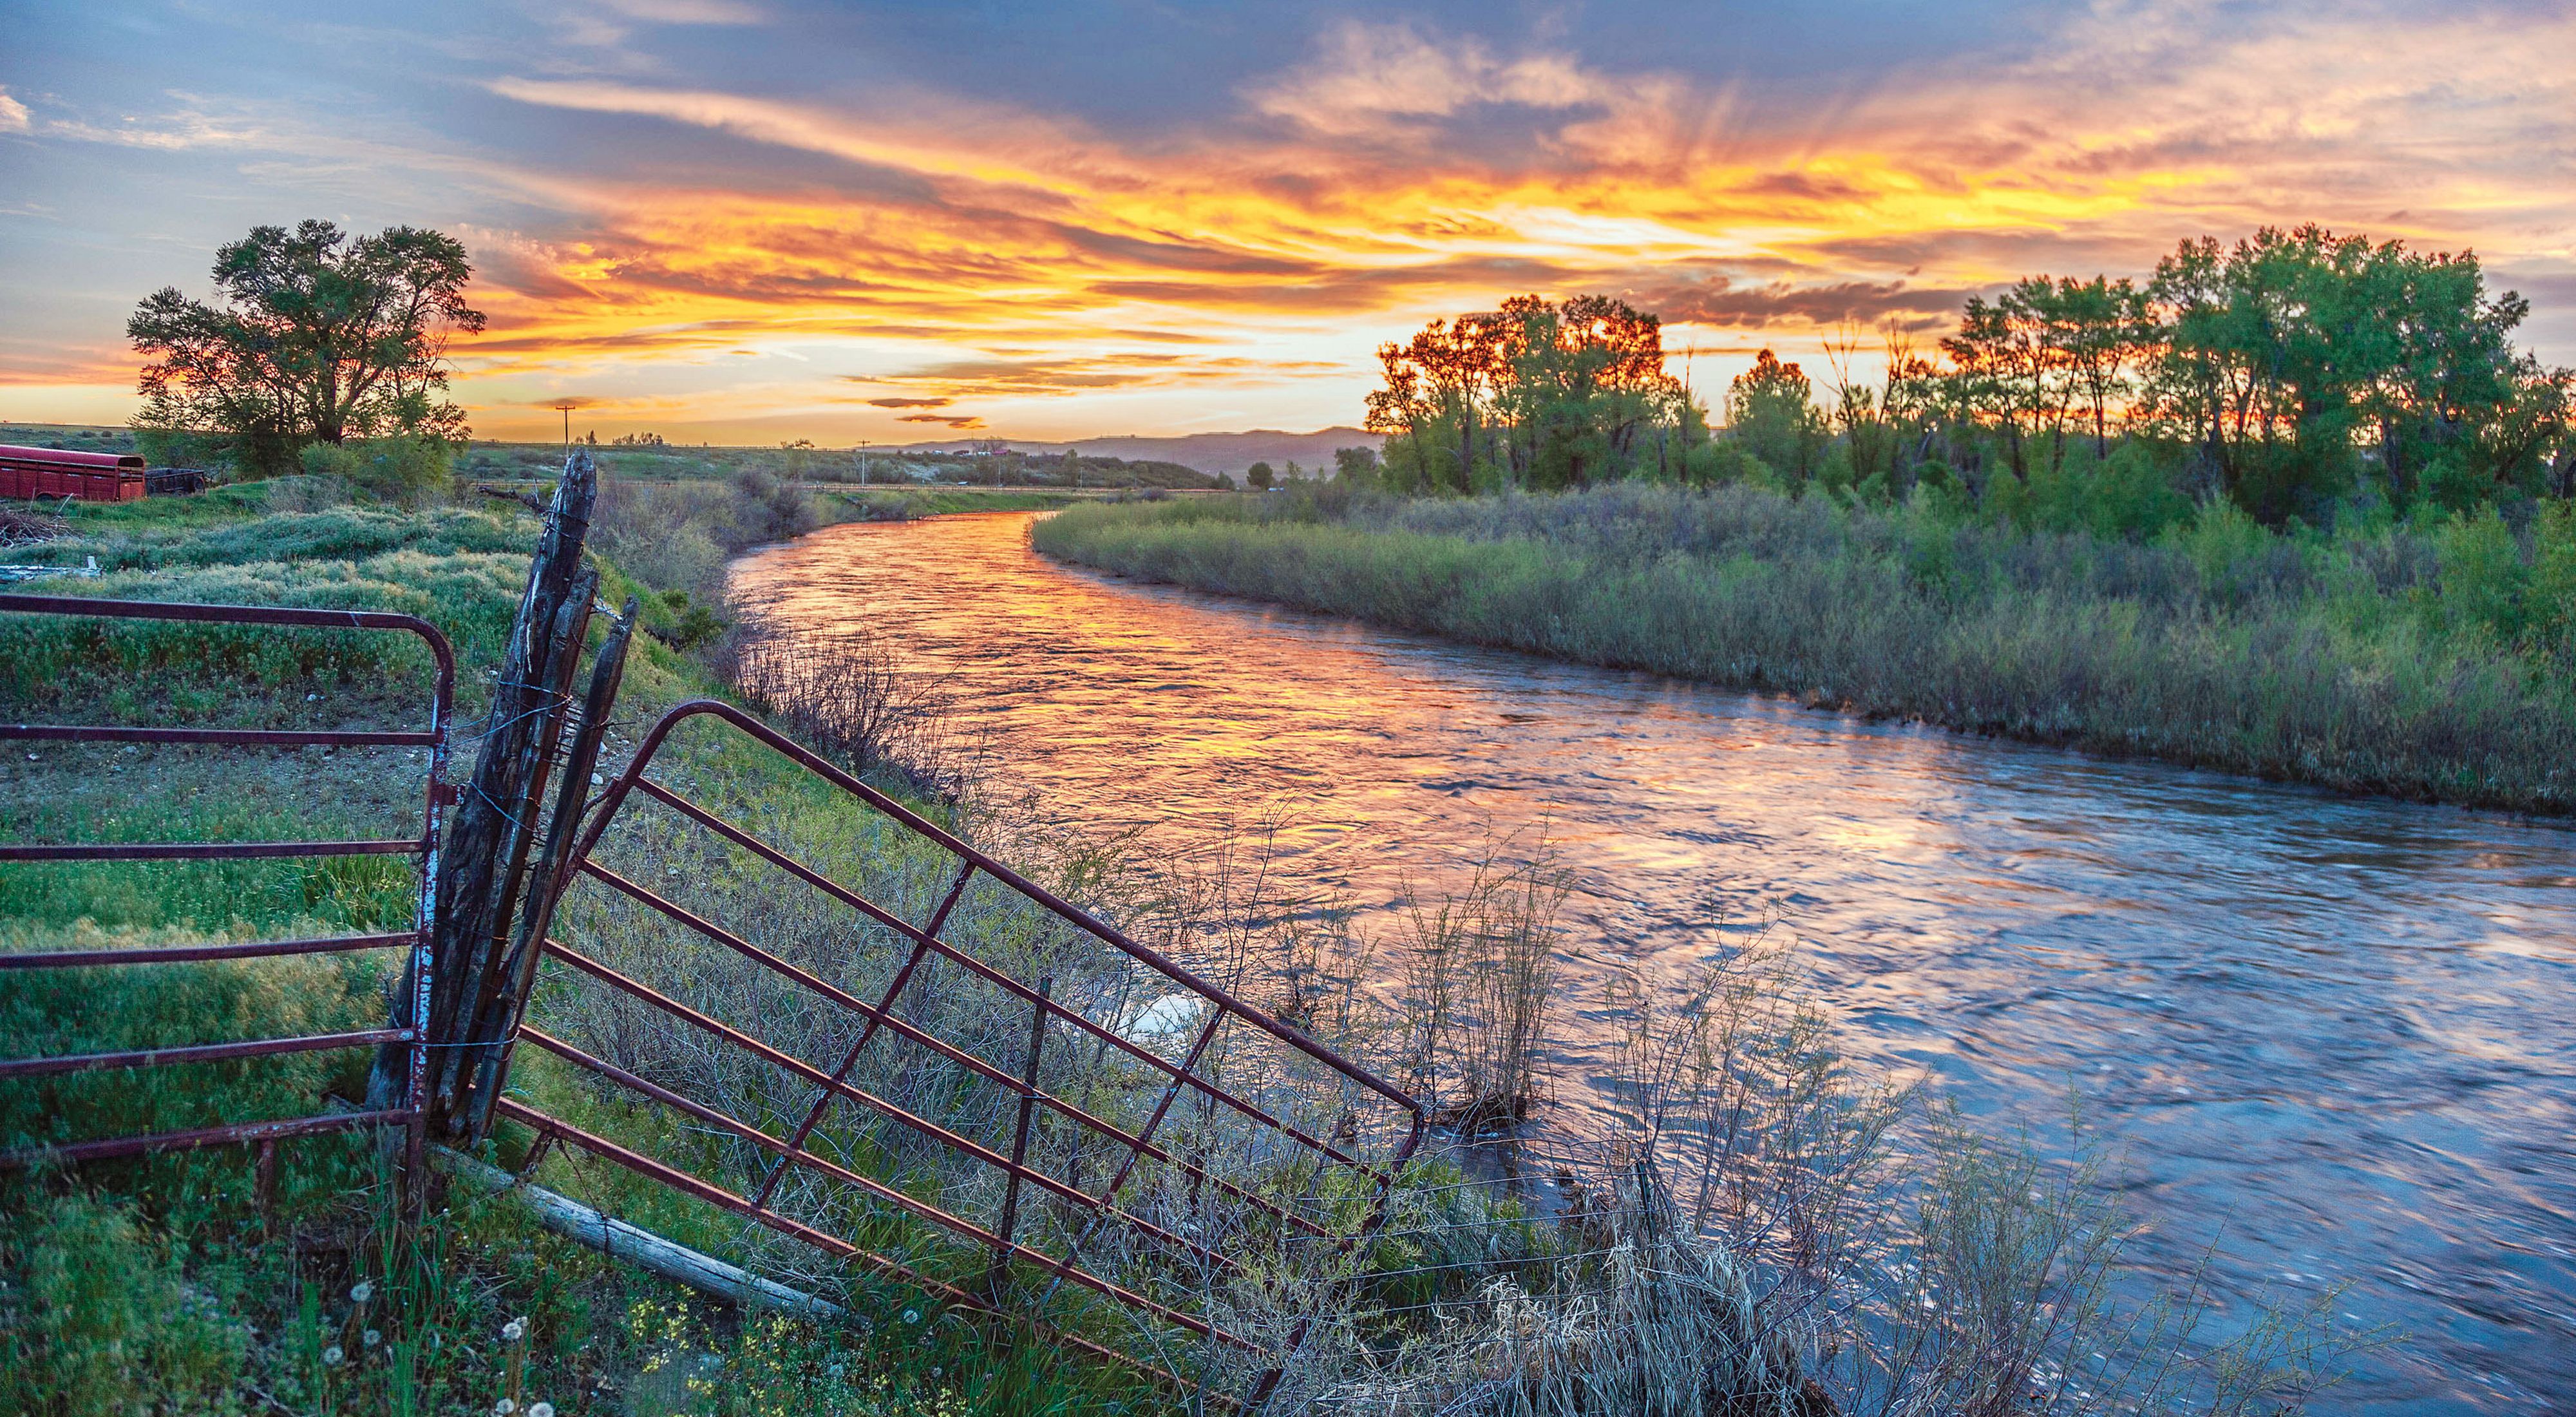 A river flowing through a ranch at sunset.